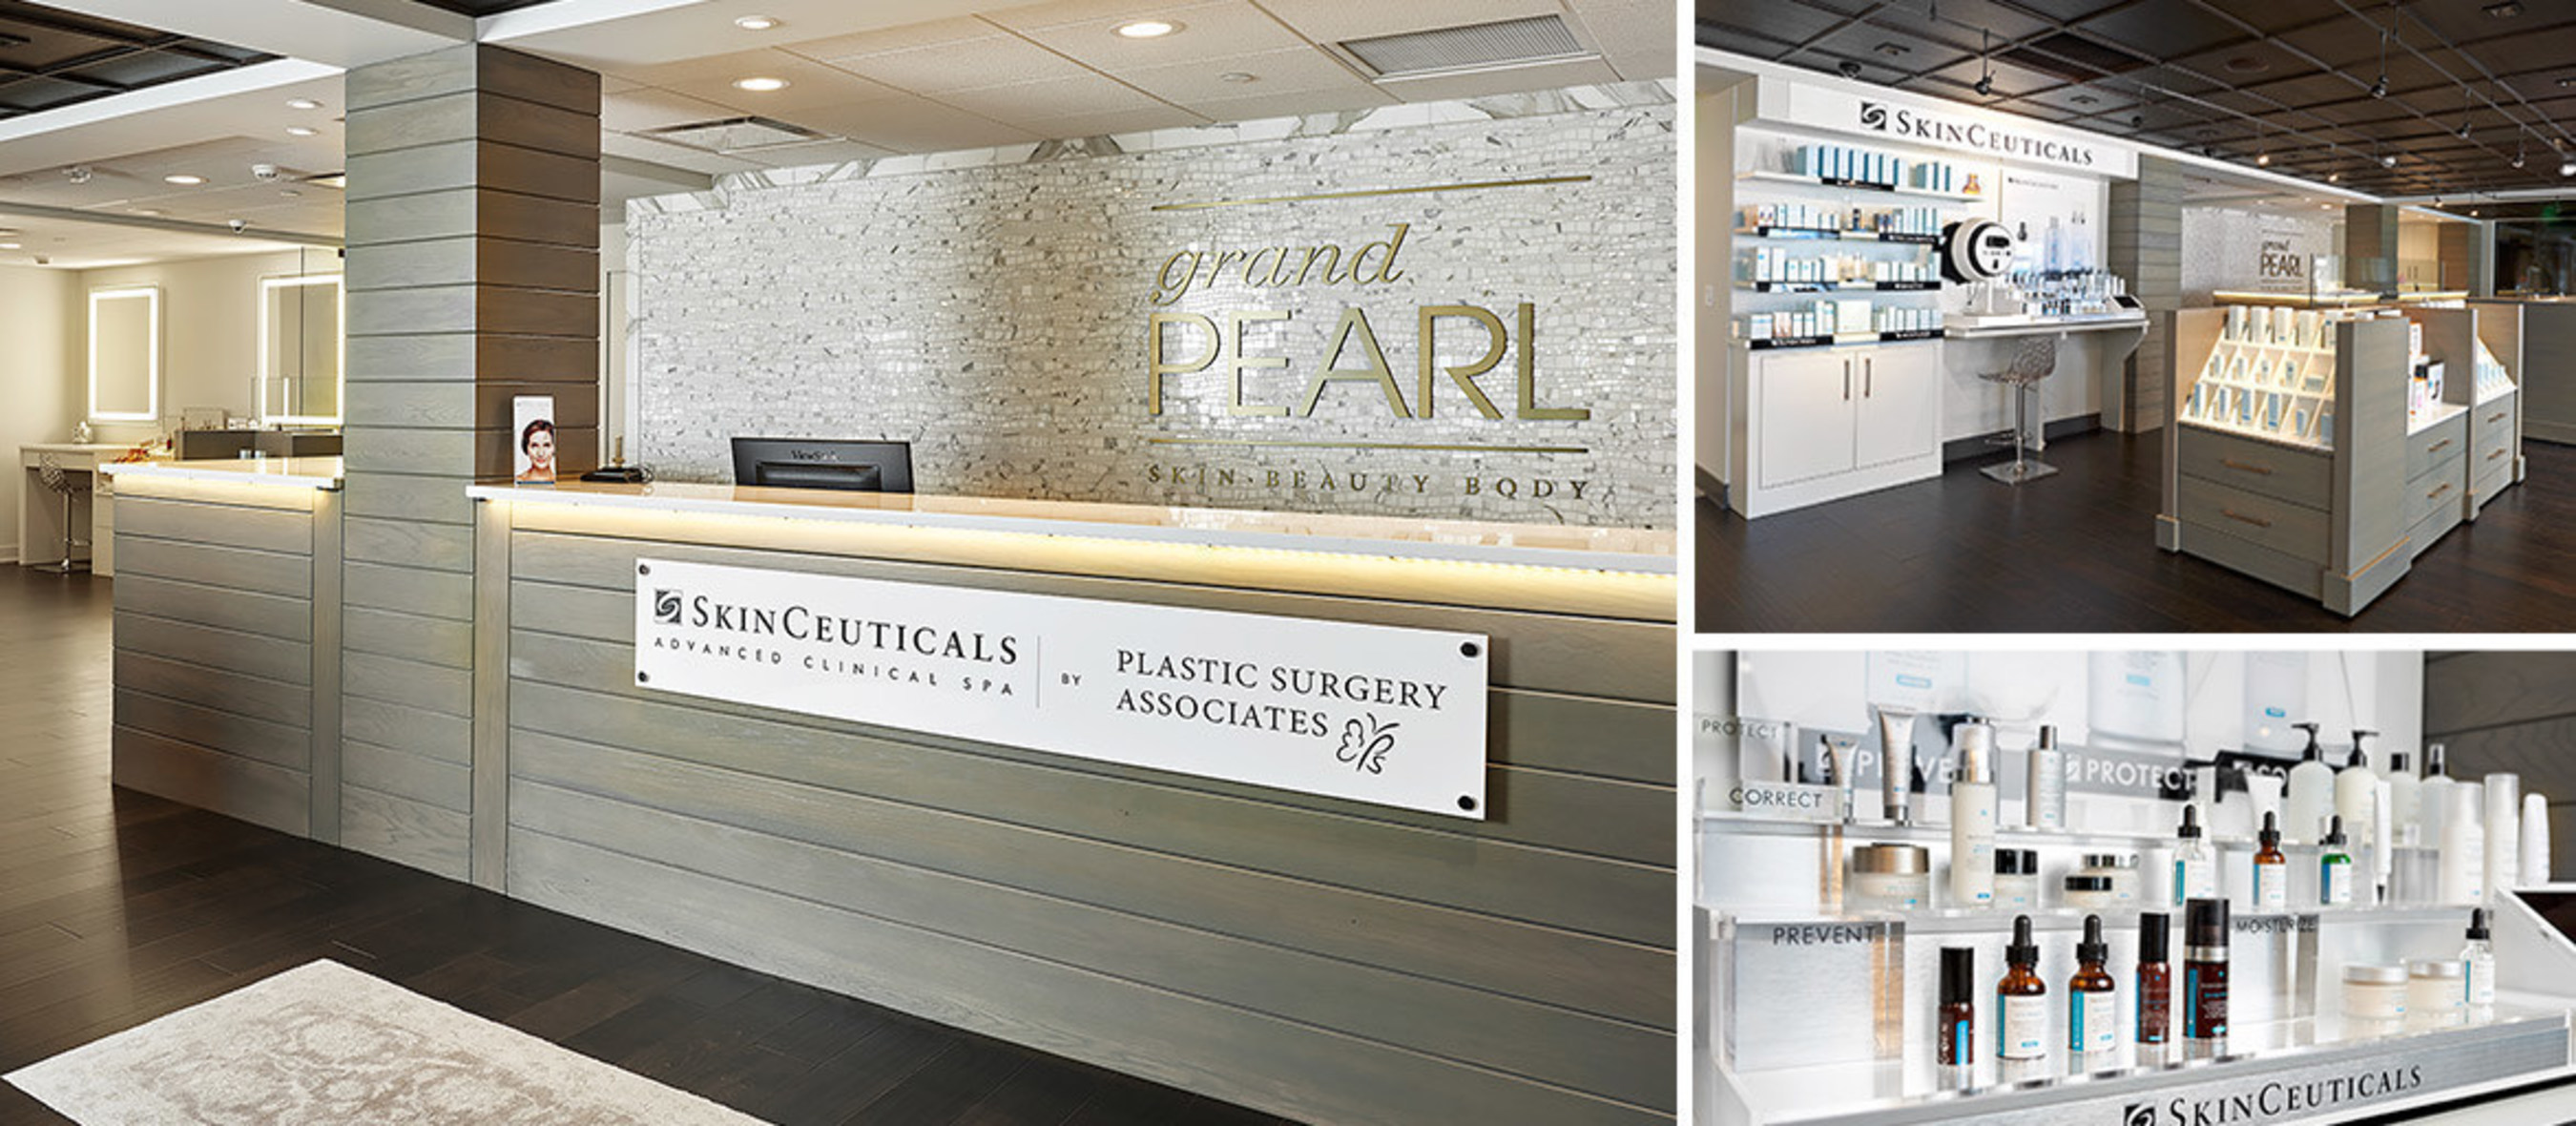 SkinCeuticals and Plastic Surgery Associates announce the opening of Grand Pearl Advanced Clinical Spa.